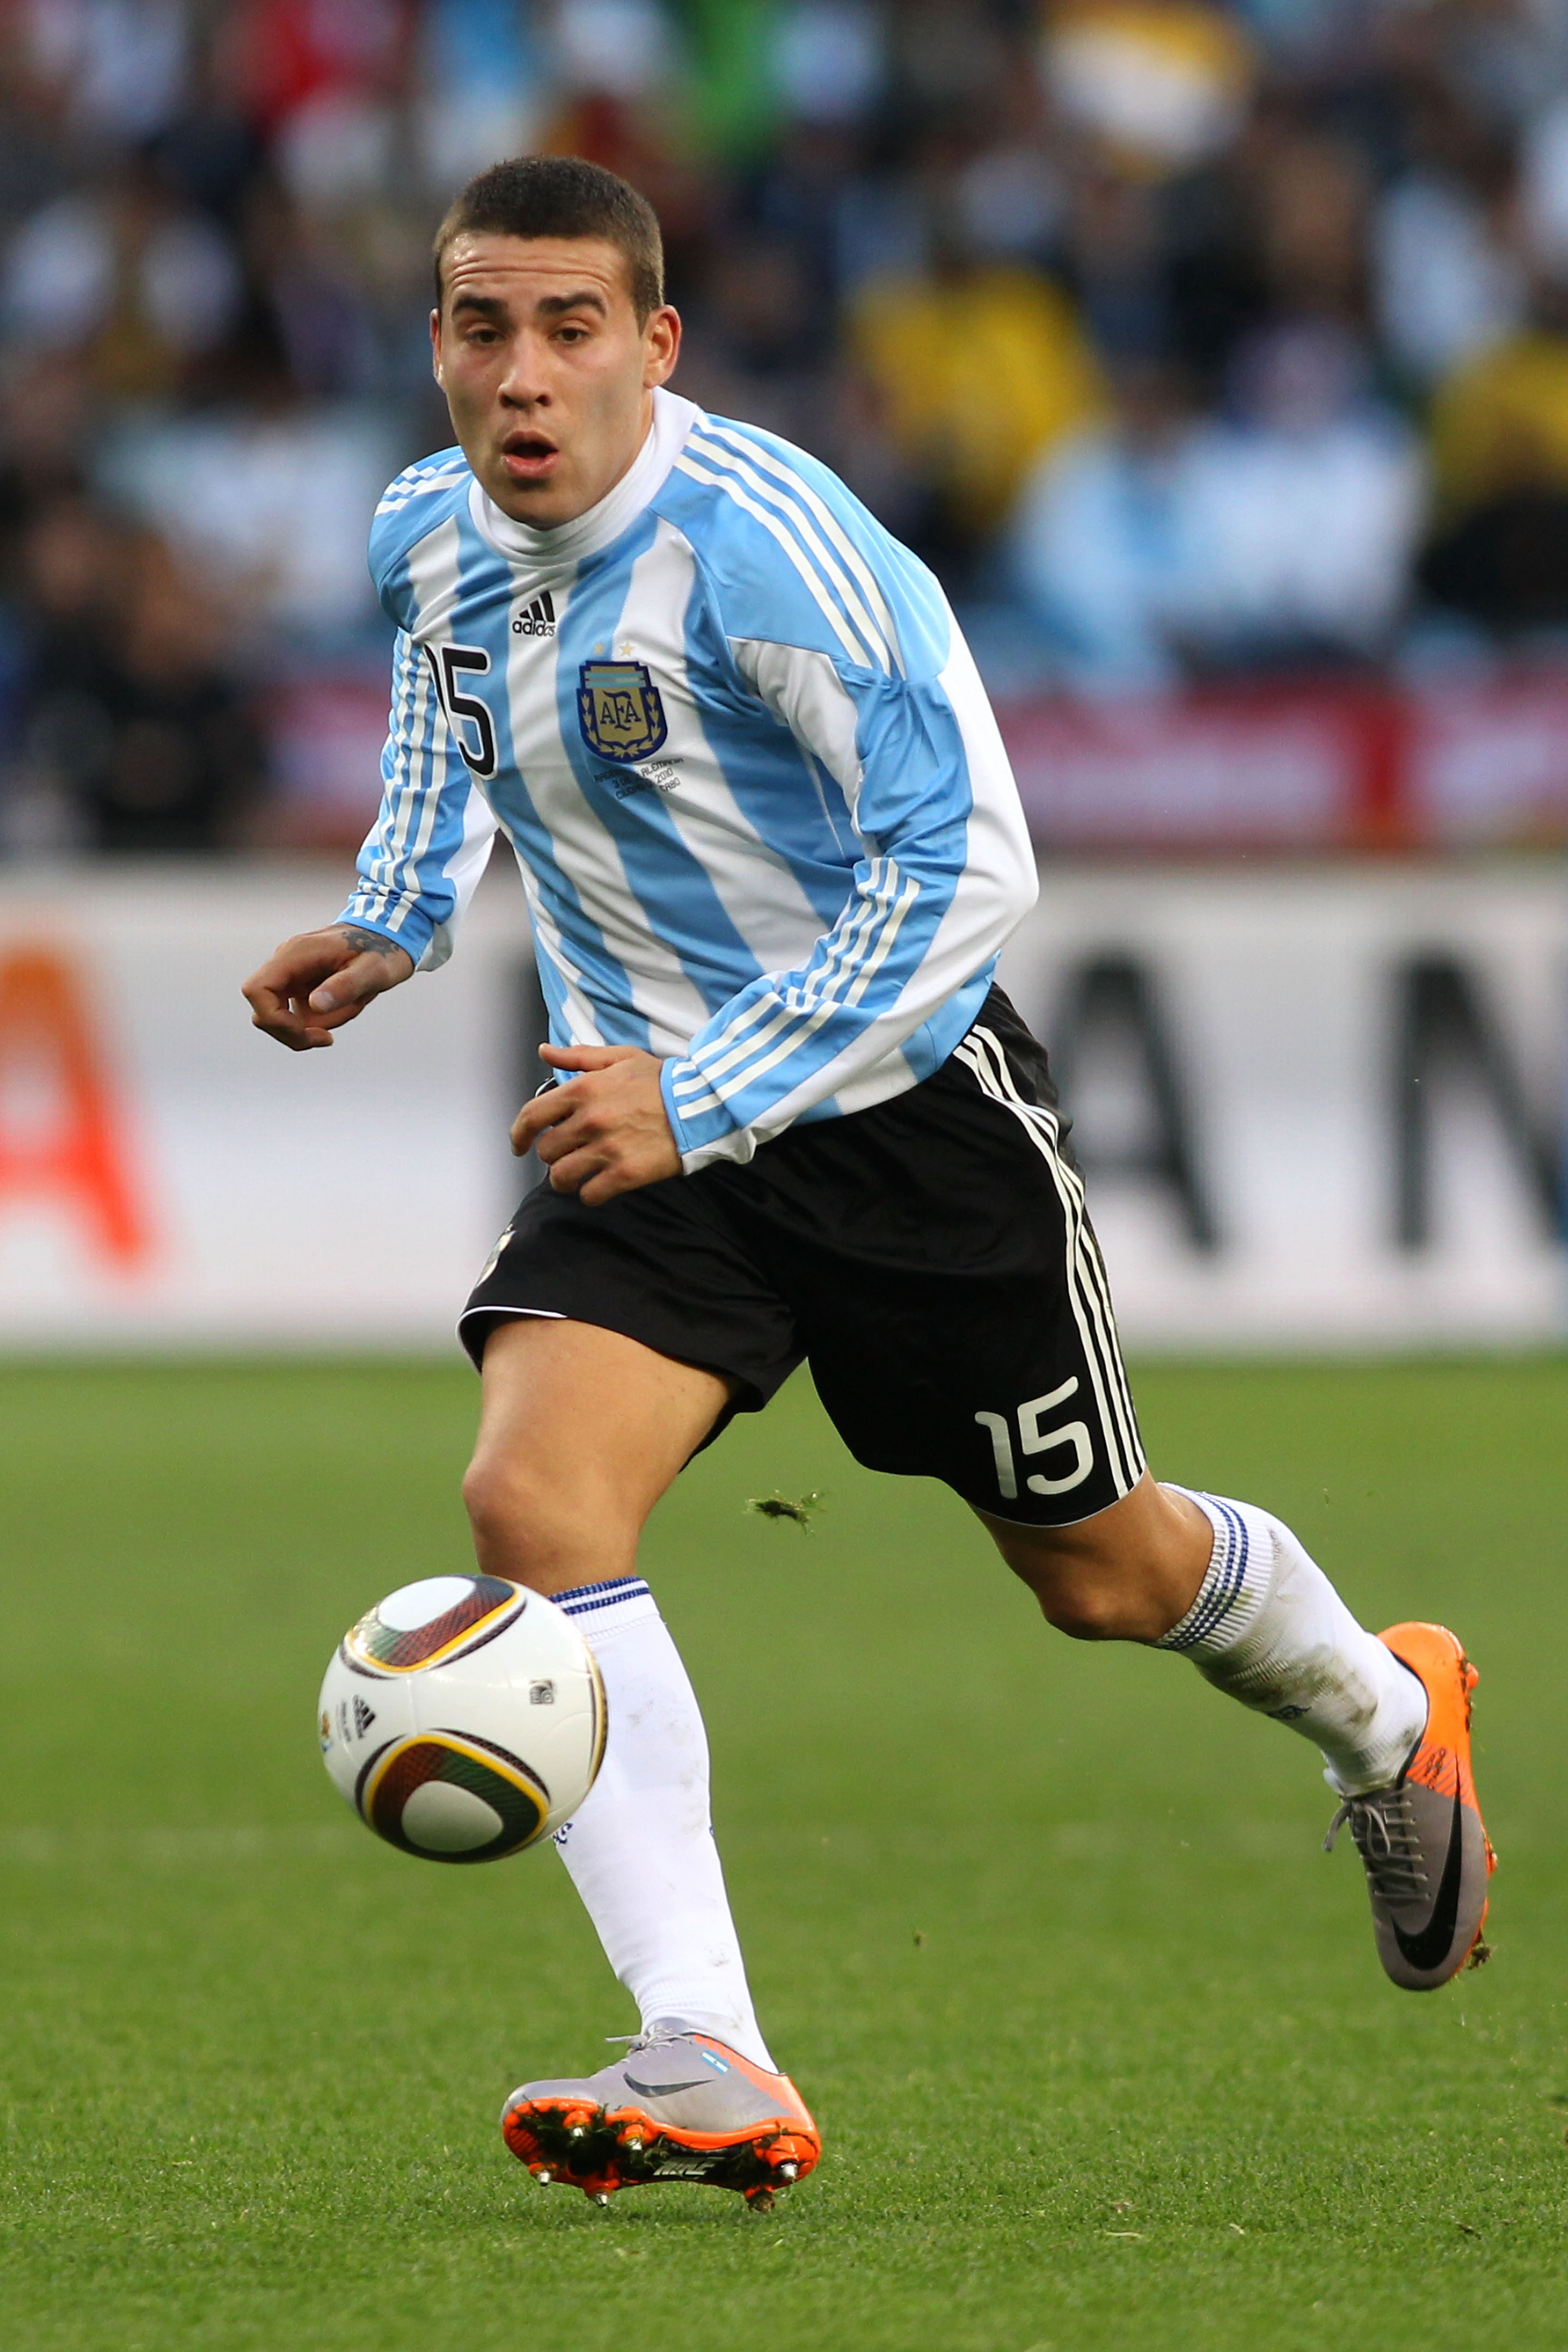 CAPE TOWN, SOUTH AFRICA - JULY 03:  Nicolas Otamendi of Argentina in action during the 2010 FIFA World Cup South Africa Quarter Final match between Argentina and Germany at Green Point Stadium on July 3, 2010 in Cape Town, South Africa.  (Photo by Joern P